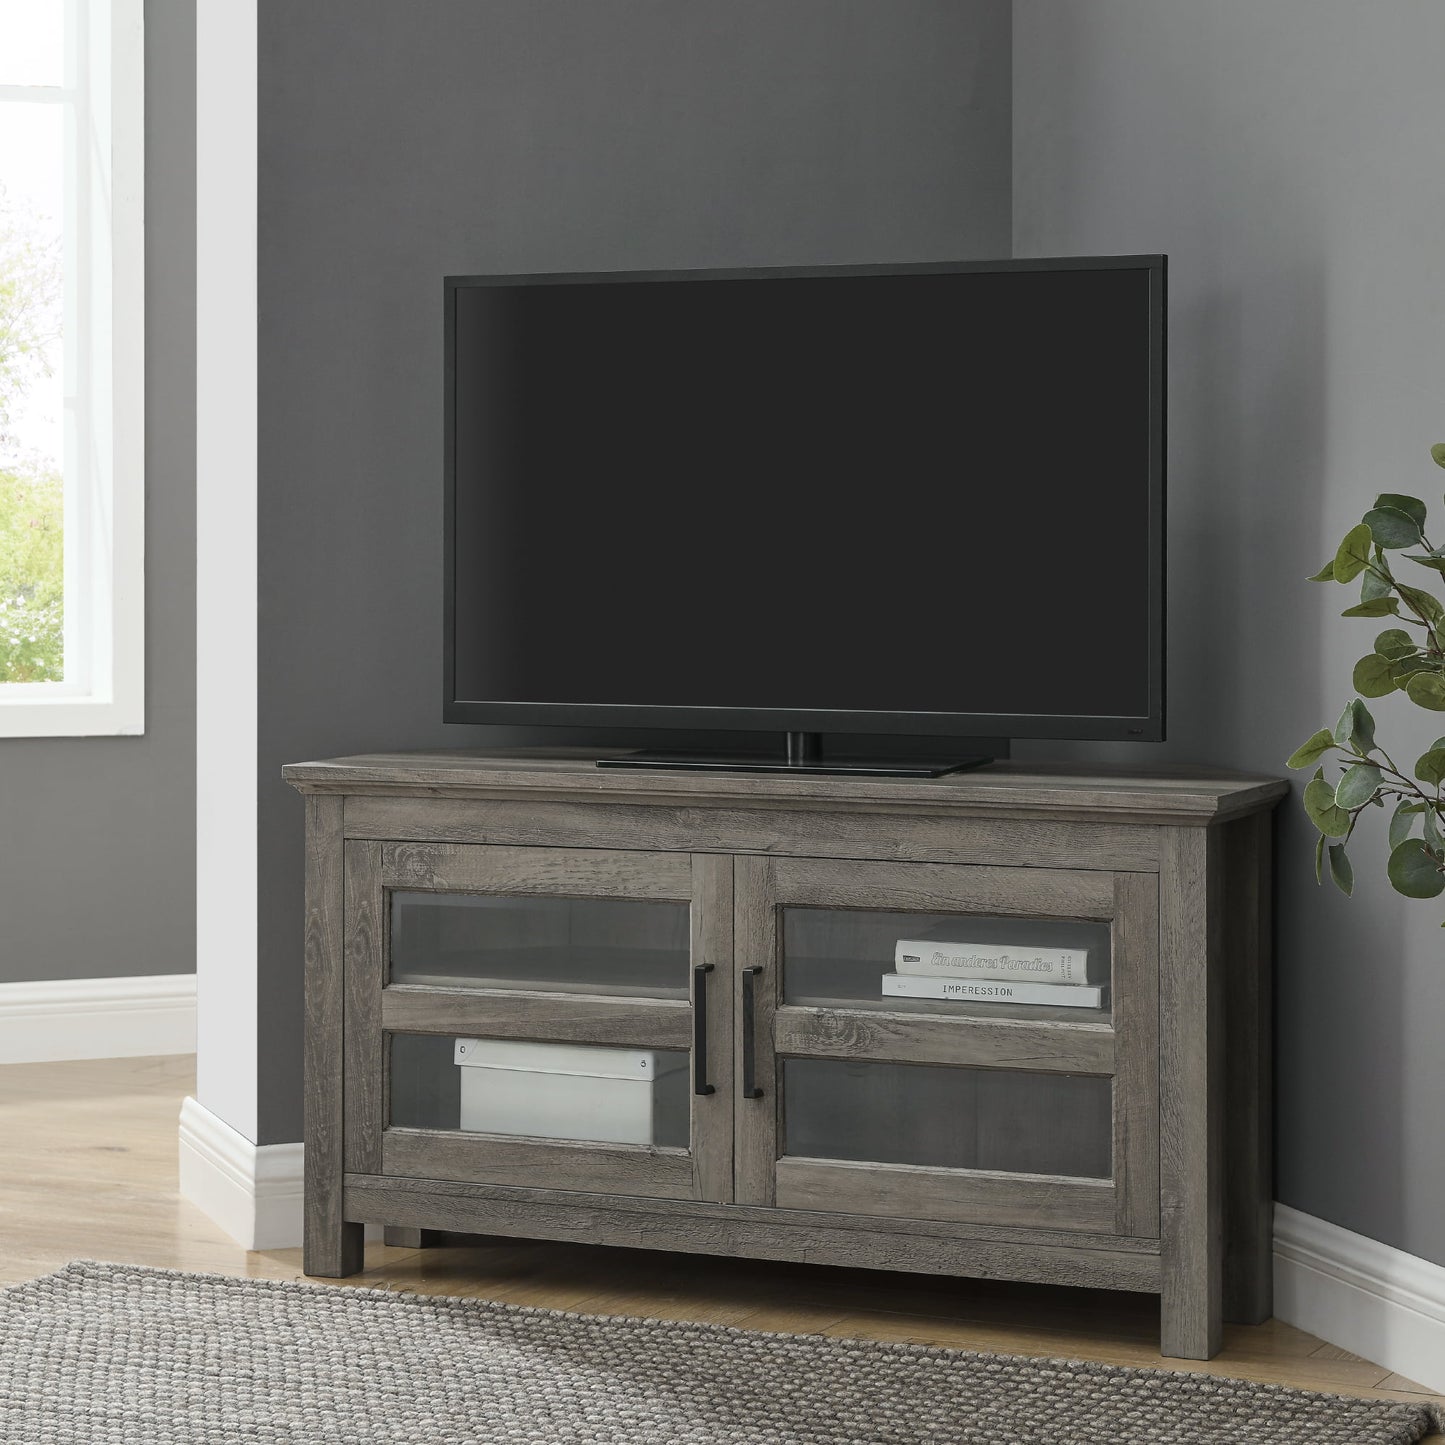 Woven Paths Modern Farmhouse Corner TV Stand for TVs up to 48", Grey Wash tv stand